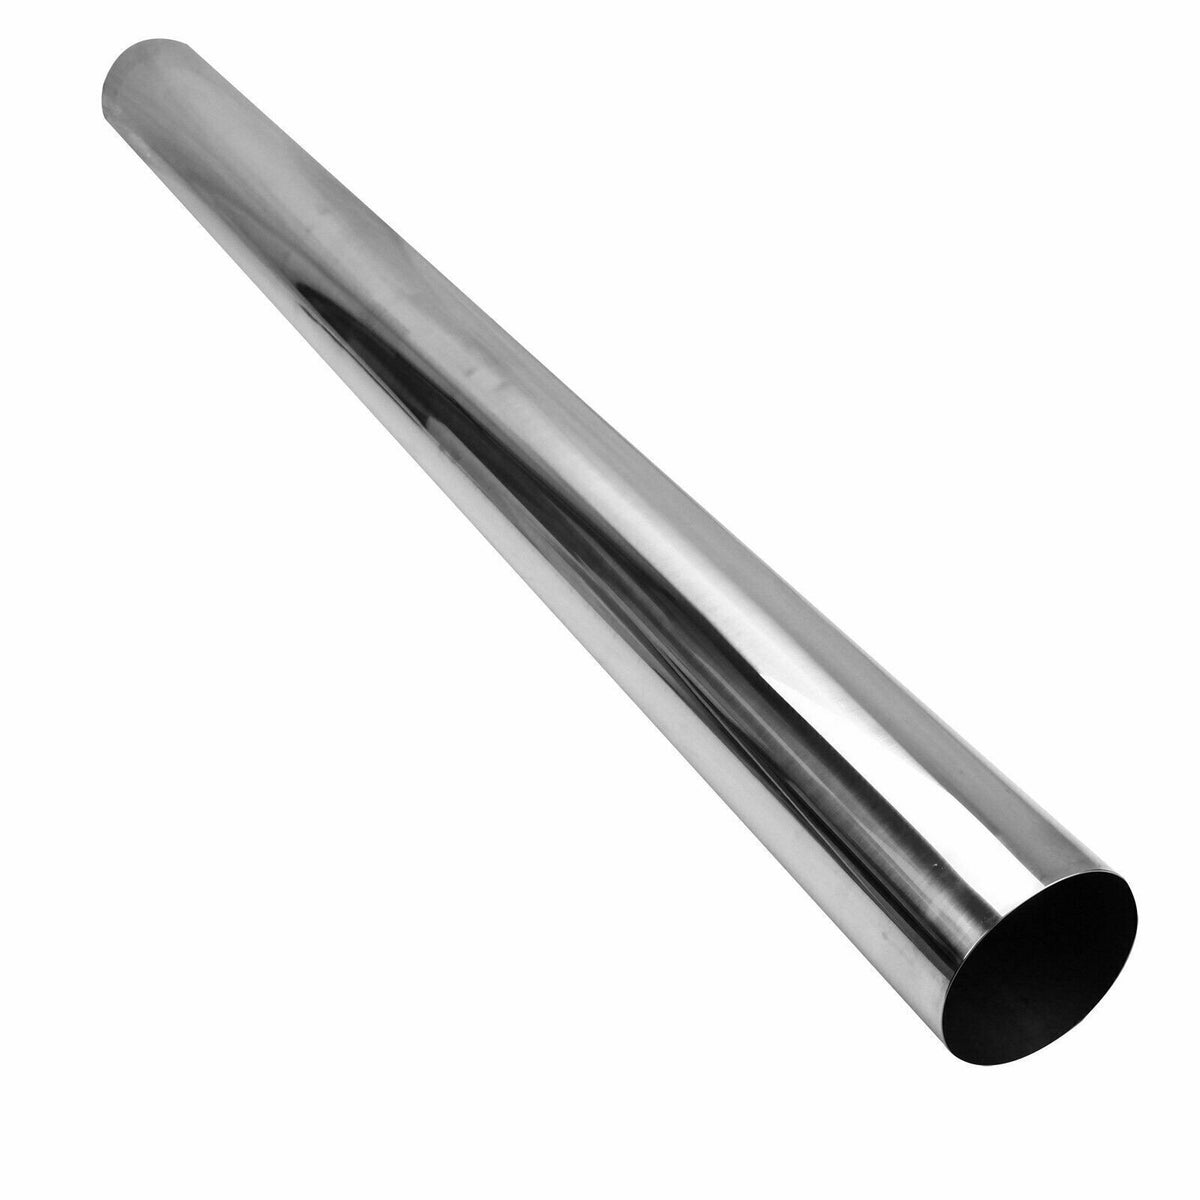 EXHAUST TUBING PIPE T304/316 STAINLESS STEEL HIGH QUALITY REPAIR SECTIONS 1M VAT 